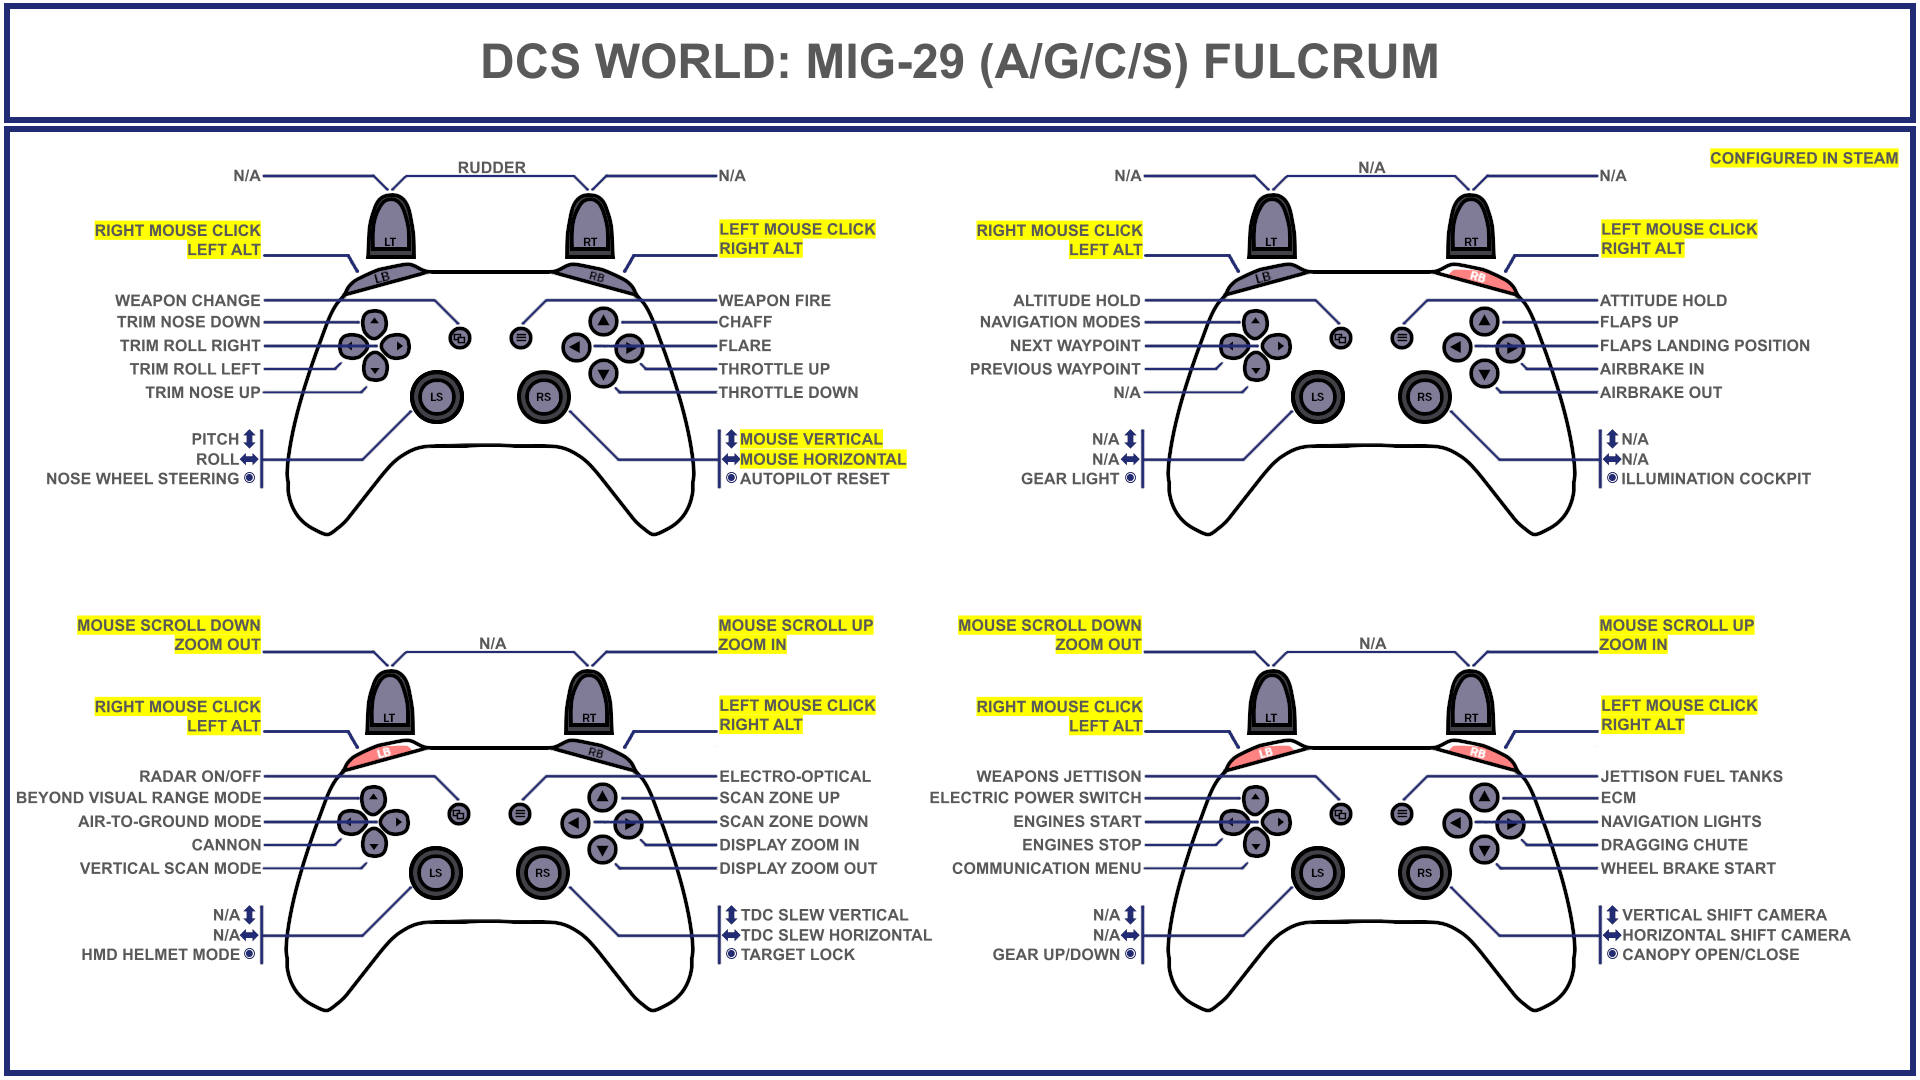 Tuuvas' Official MiG-29 Fulcrum (A, G, C/S) Gamepad Controller Layout